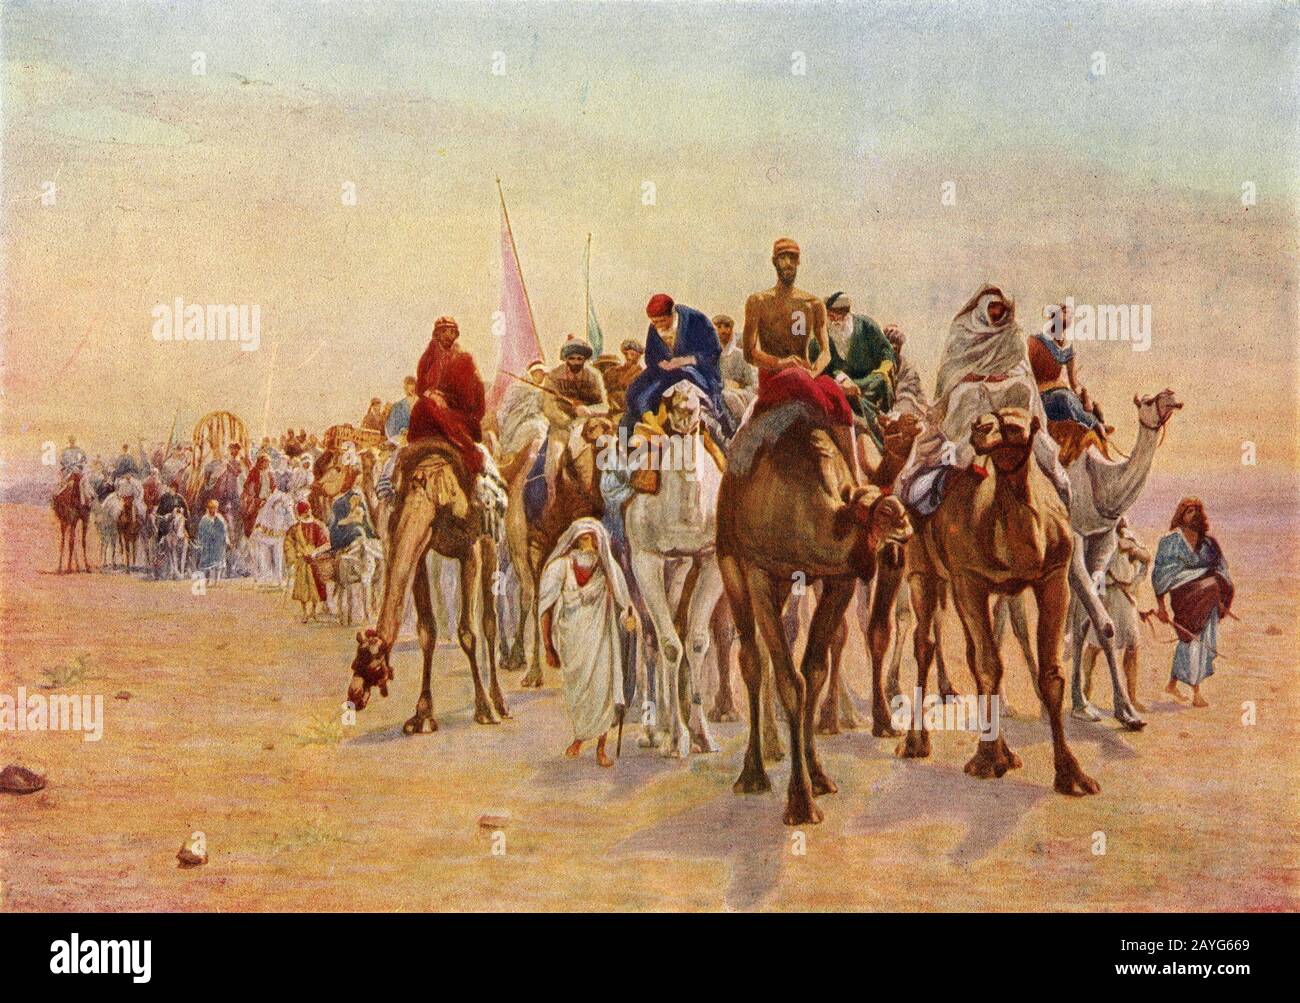 Illustration of a caravan of people and camels on a hadj or pilgrimage to Mecca one of the five pillars of Islam.  Originally produced by the Photochrom Company of London Ltd. circa 1914 Stock Photo